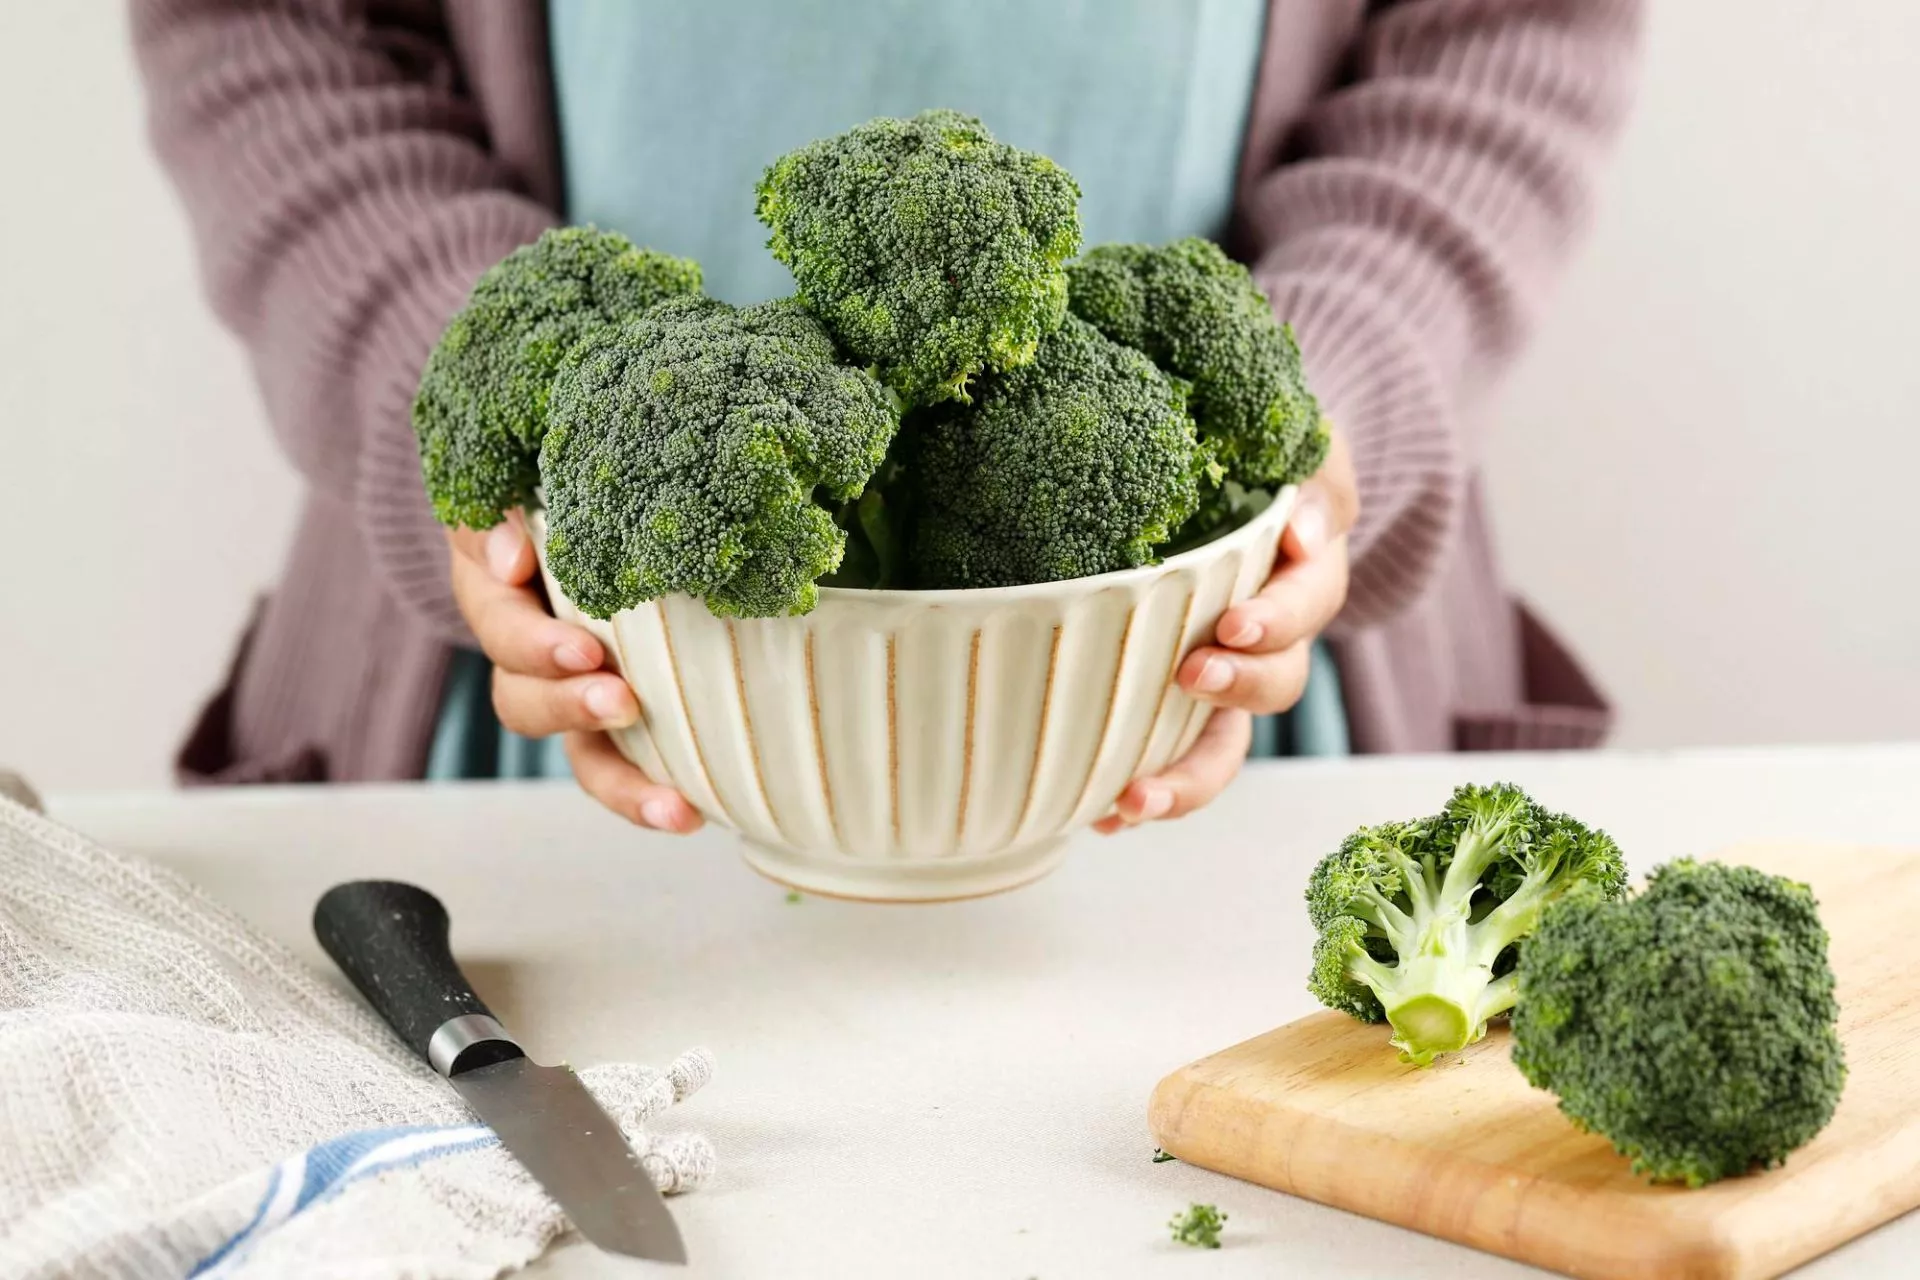 15 Winter Vegetables That Are Seriously Good for You